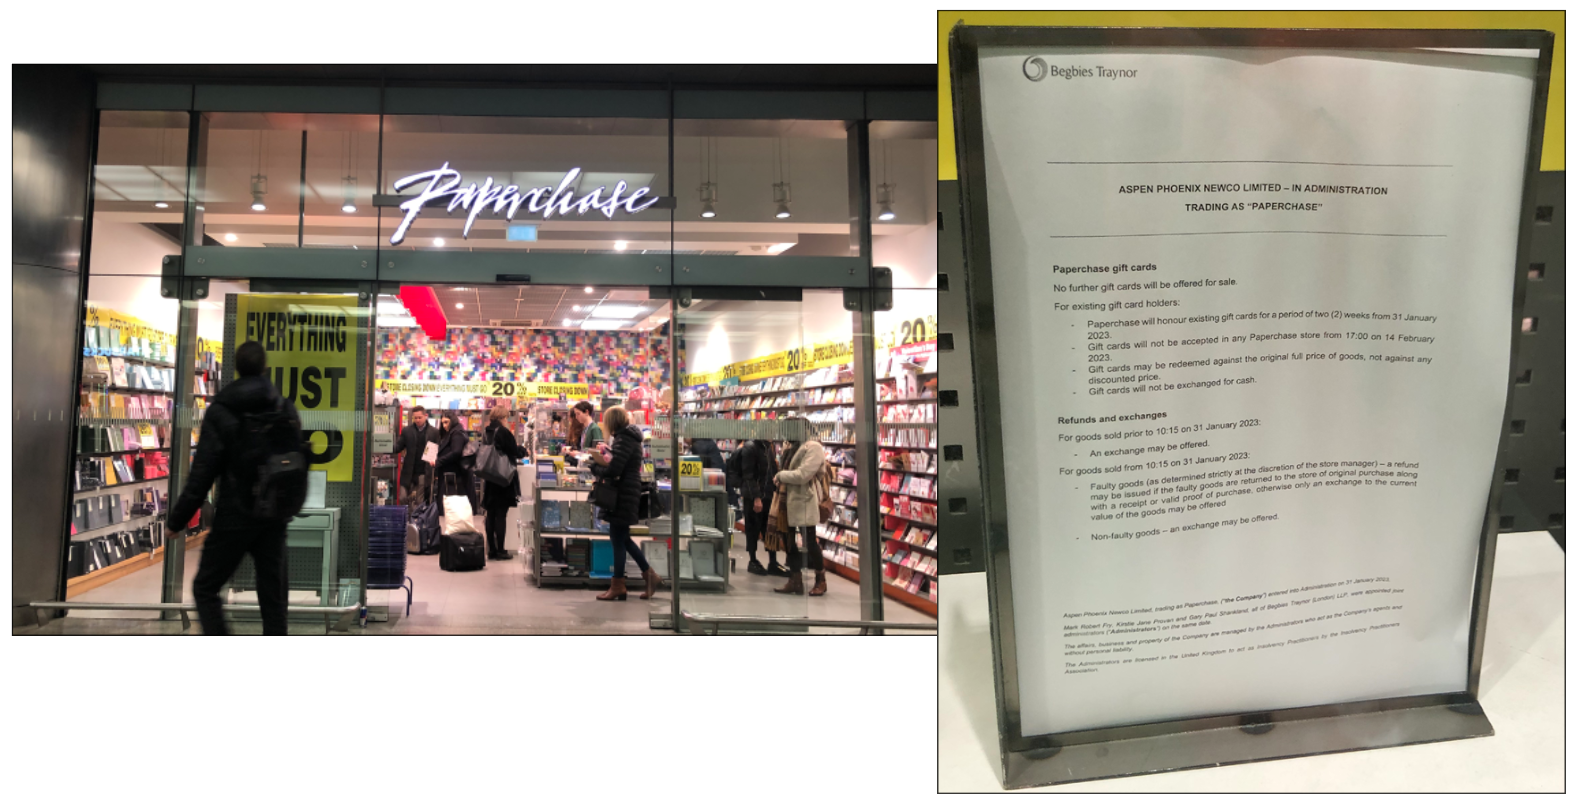 Above and top: Stores have closing-down signage – and the in-store notice explaining the gift card policy